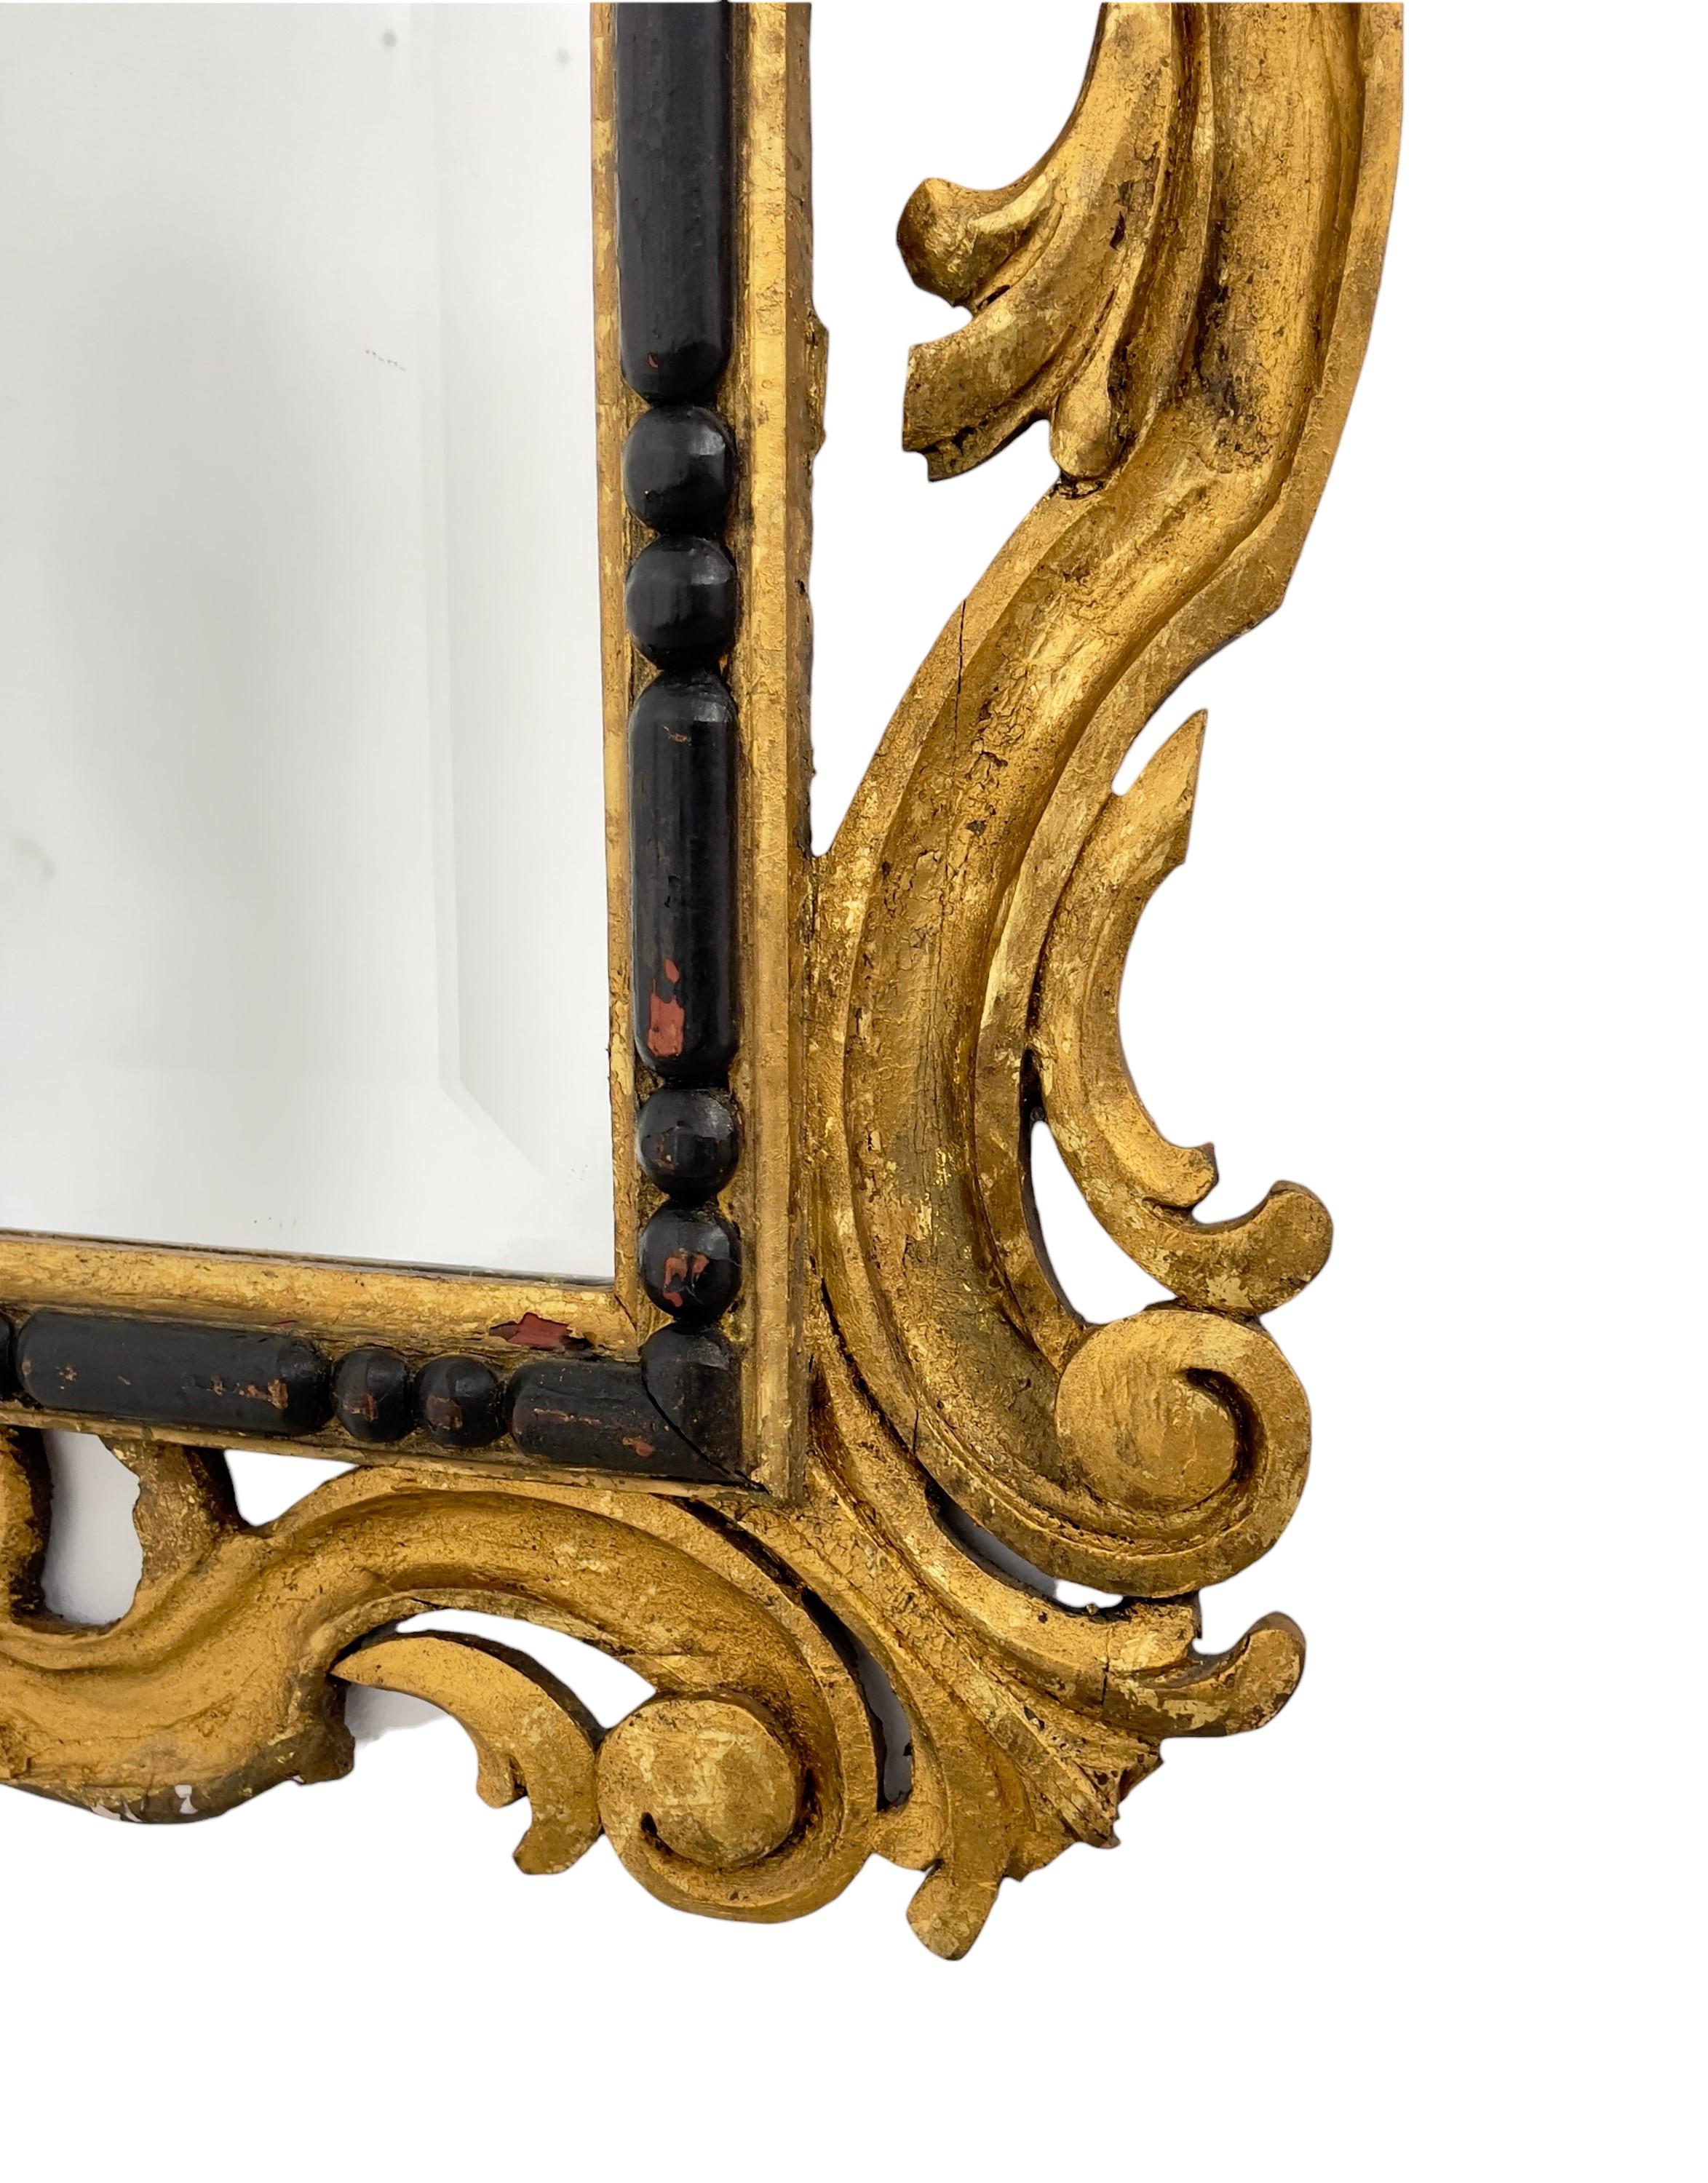 Antique gilded mirror with wooden frame and gilded porporin. Italian manufacture. 1700. 